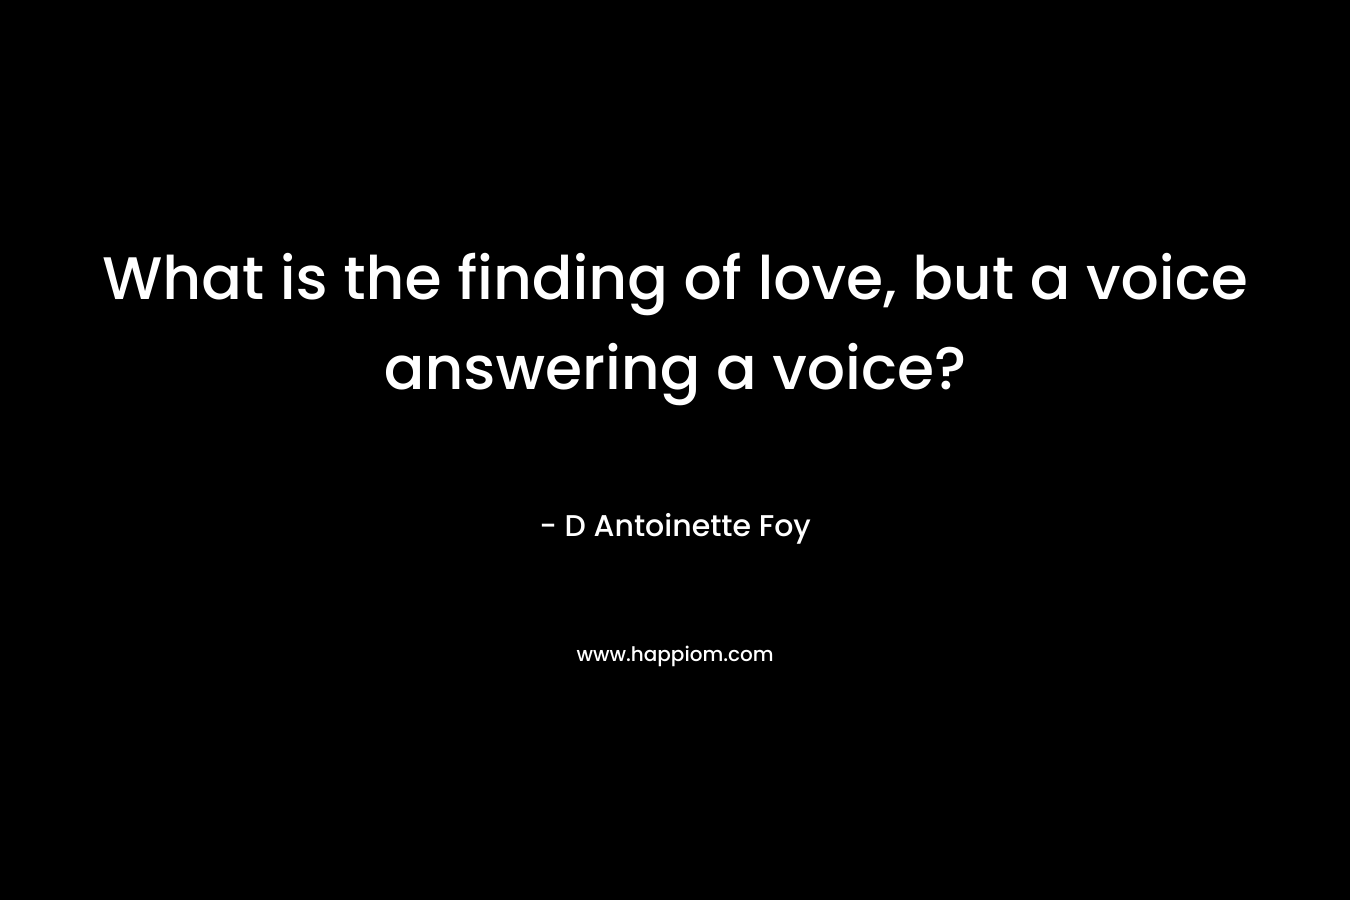 What is the finding of love, but a voice answering a voice?